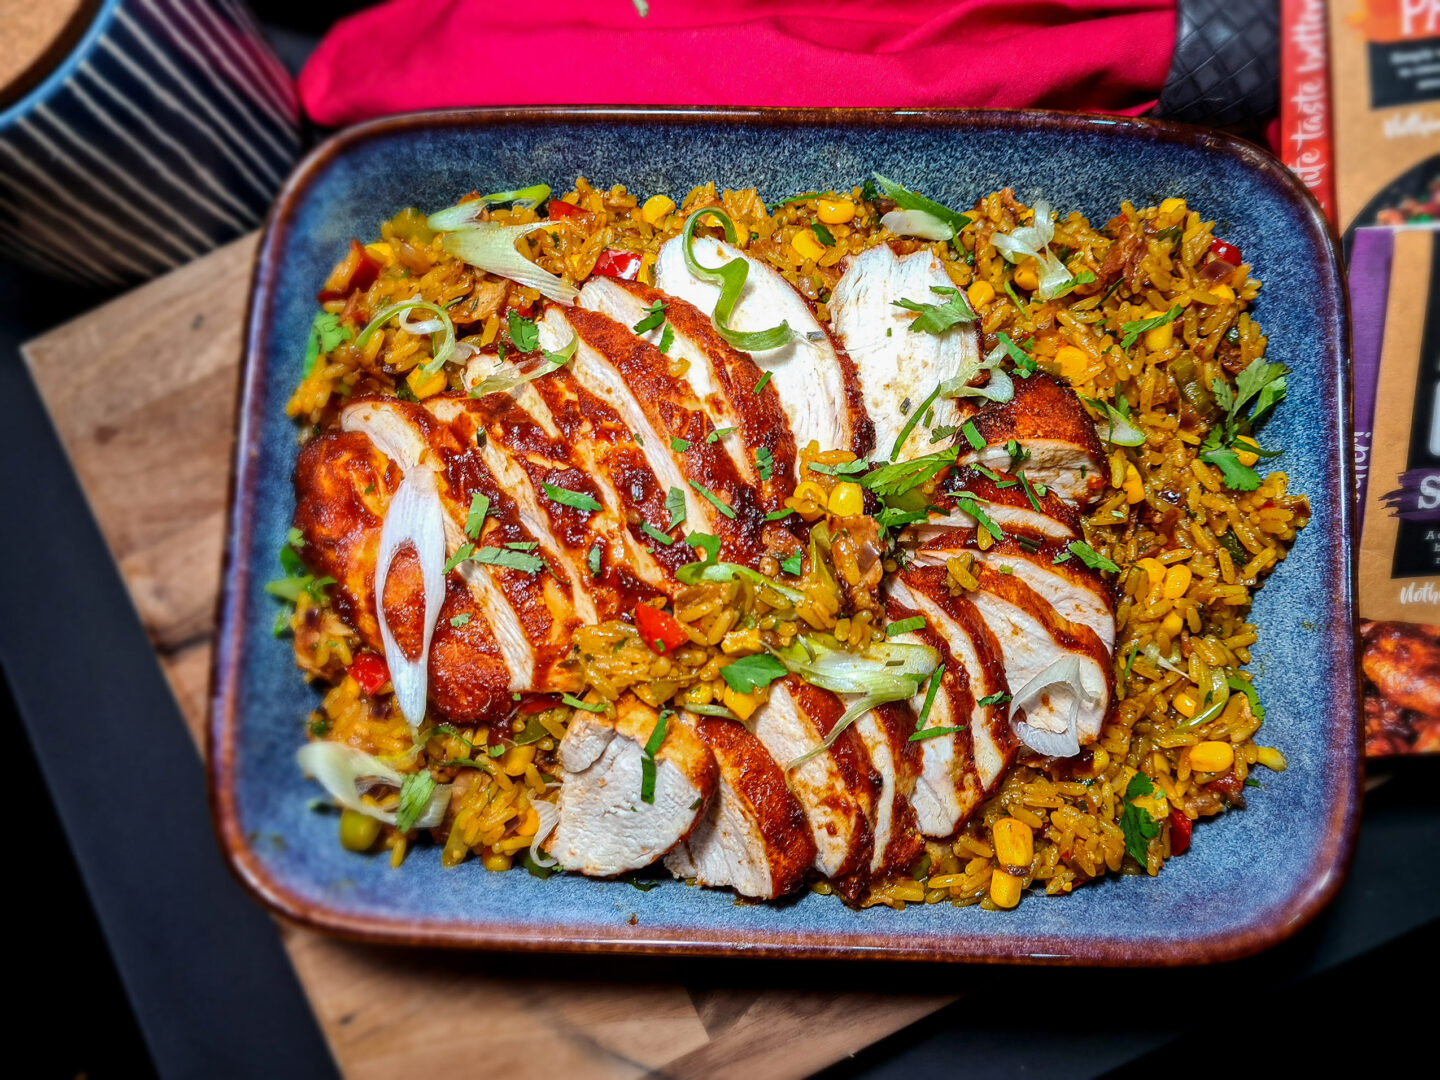 Large dish with paella rice and glazed chicken breast